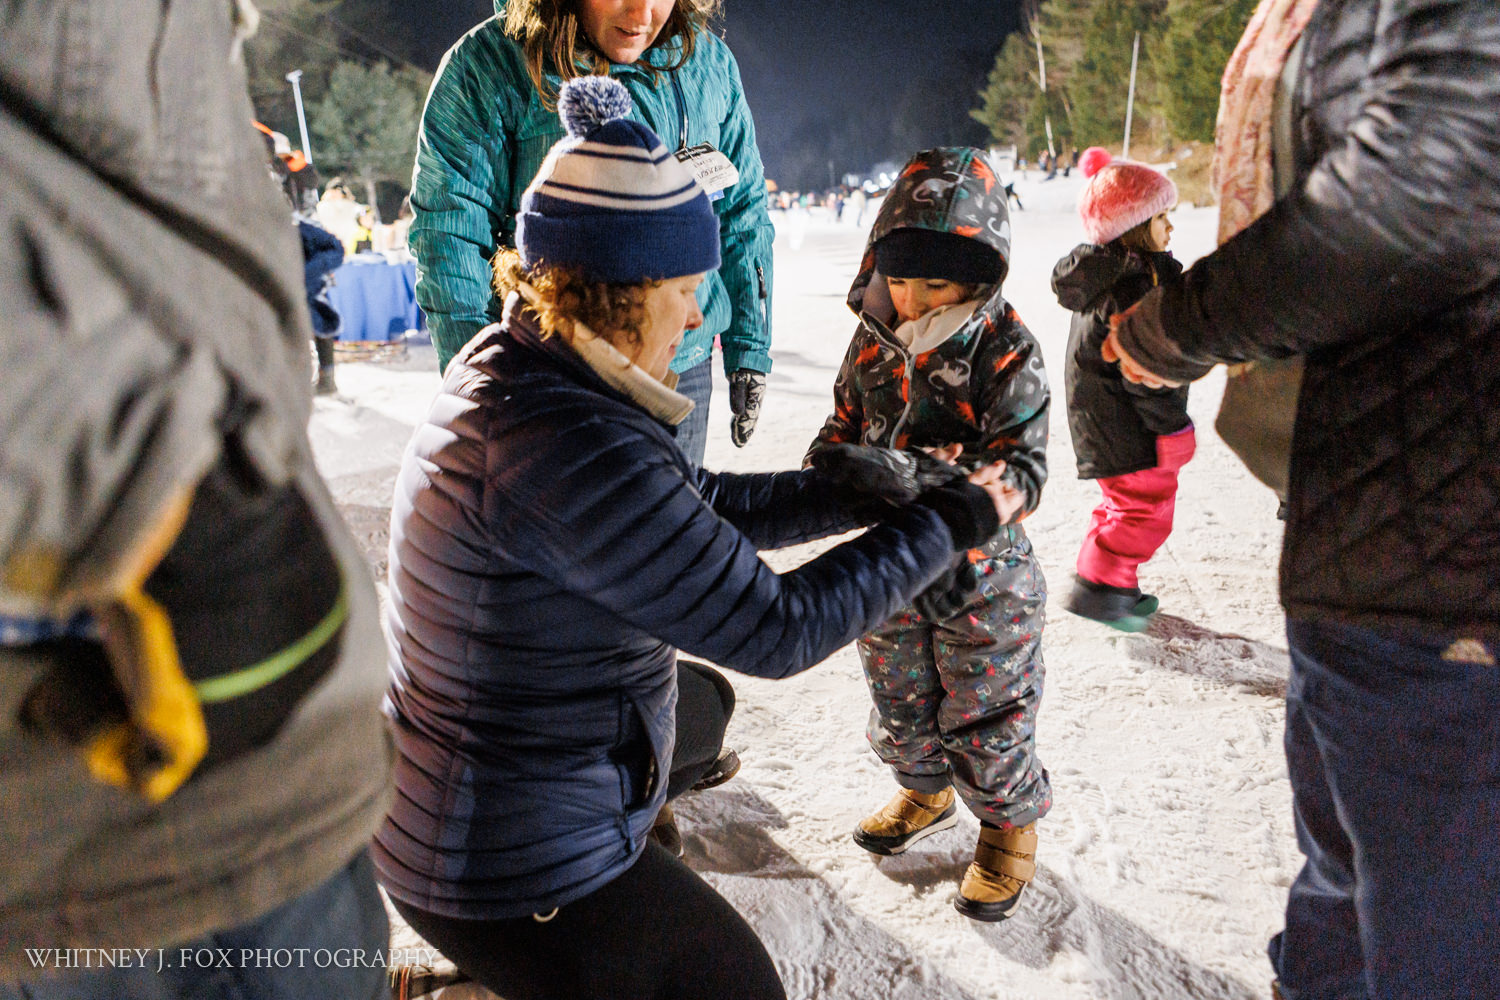 99 winter kids welcome to winter 2022 lost valley auburn maine documentary event photographer whitney j fox 3457 w